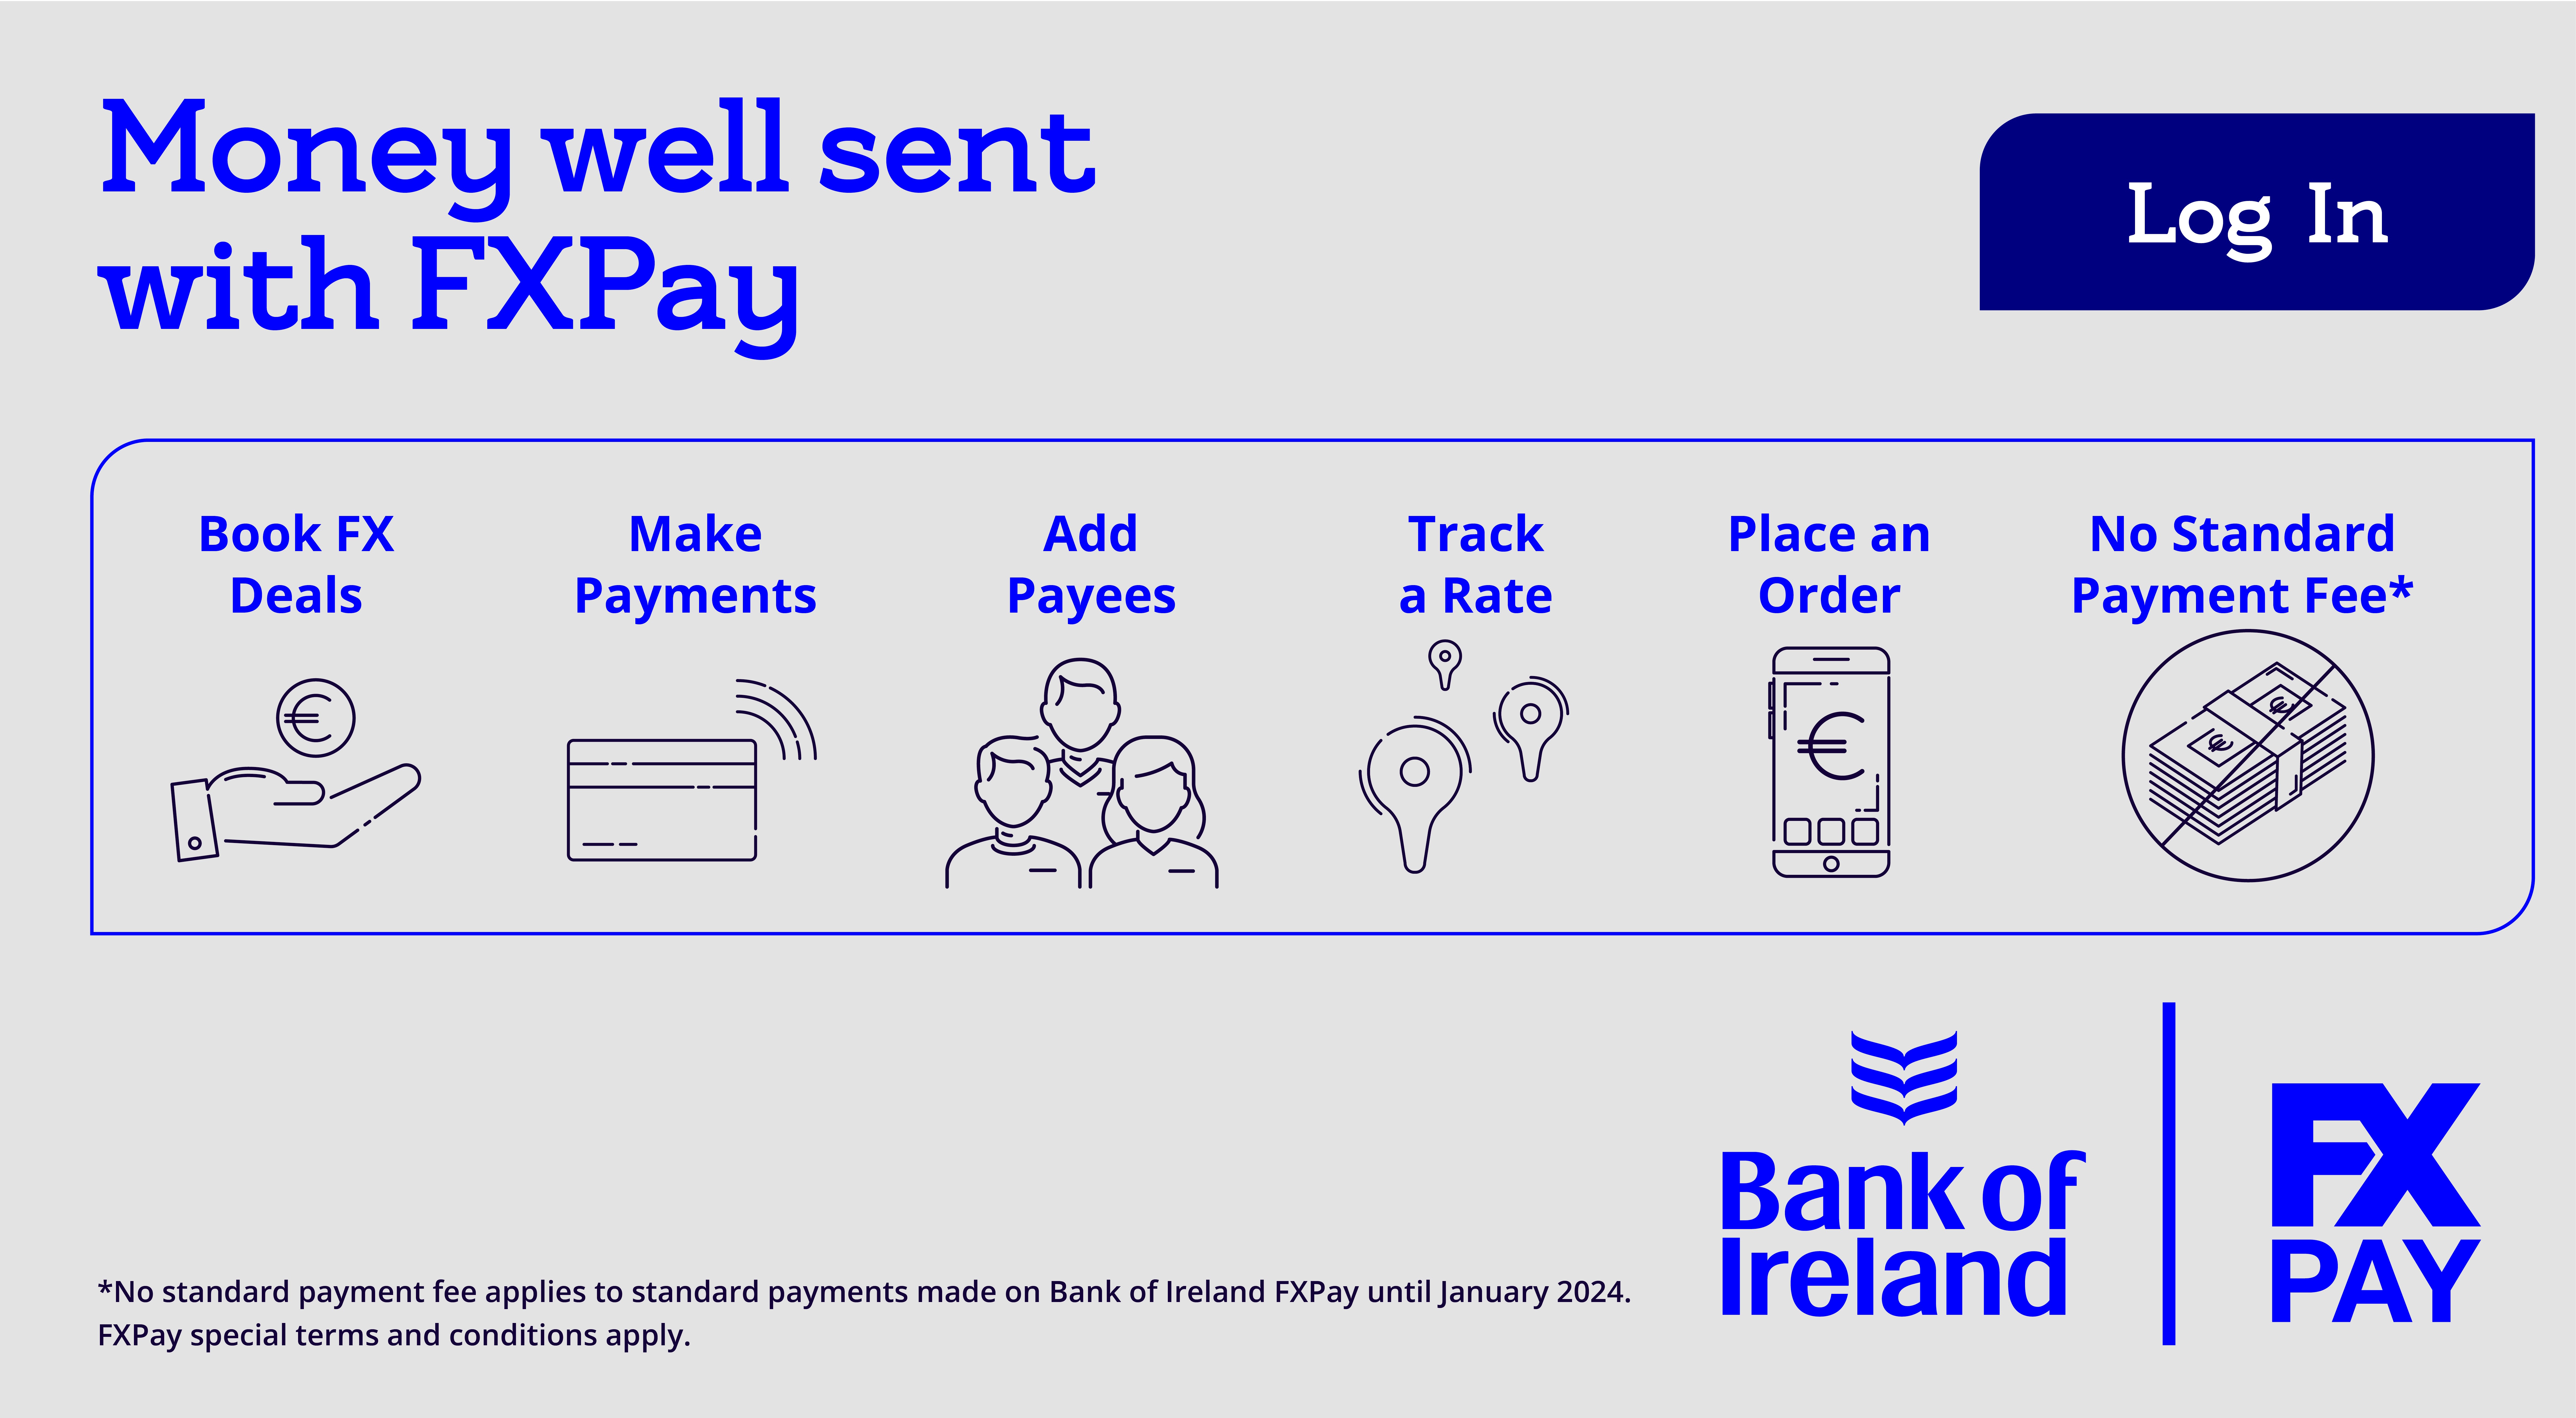 Money well sent with FX Pay Do so much more with FX Pay Book FX Deals Make Payments Add Payees Track a rate Place an Order No Standard Payment Fee Note: No Standard Payment Fee applies to standard payments made on Bank of Ireland FX Pay until January 2019